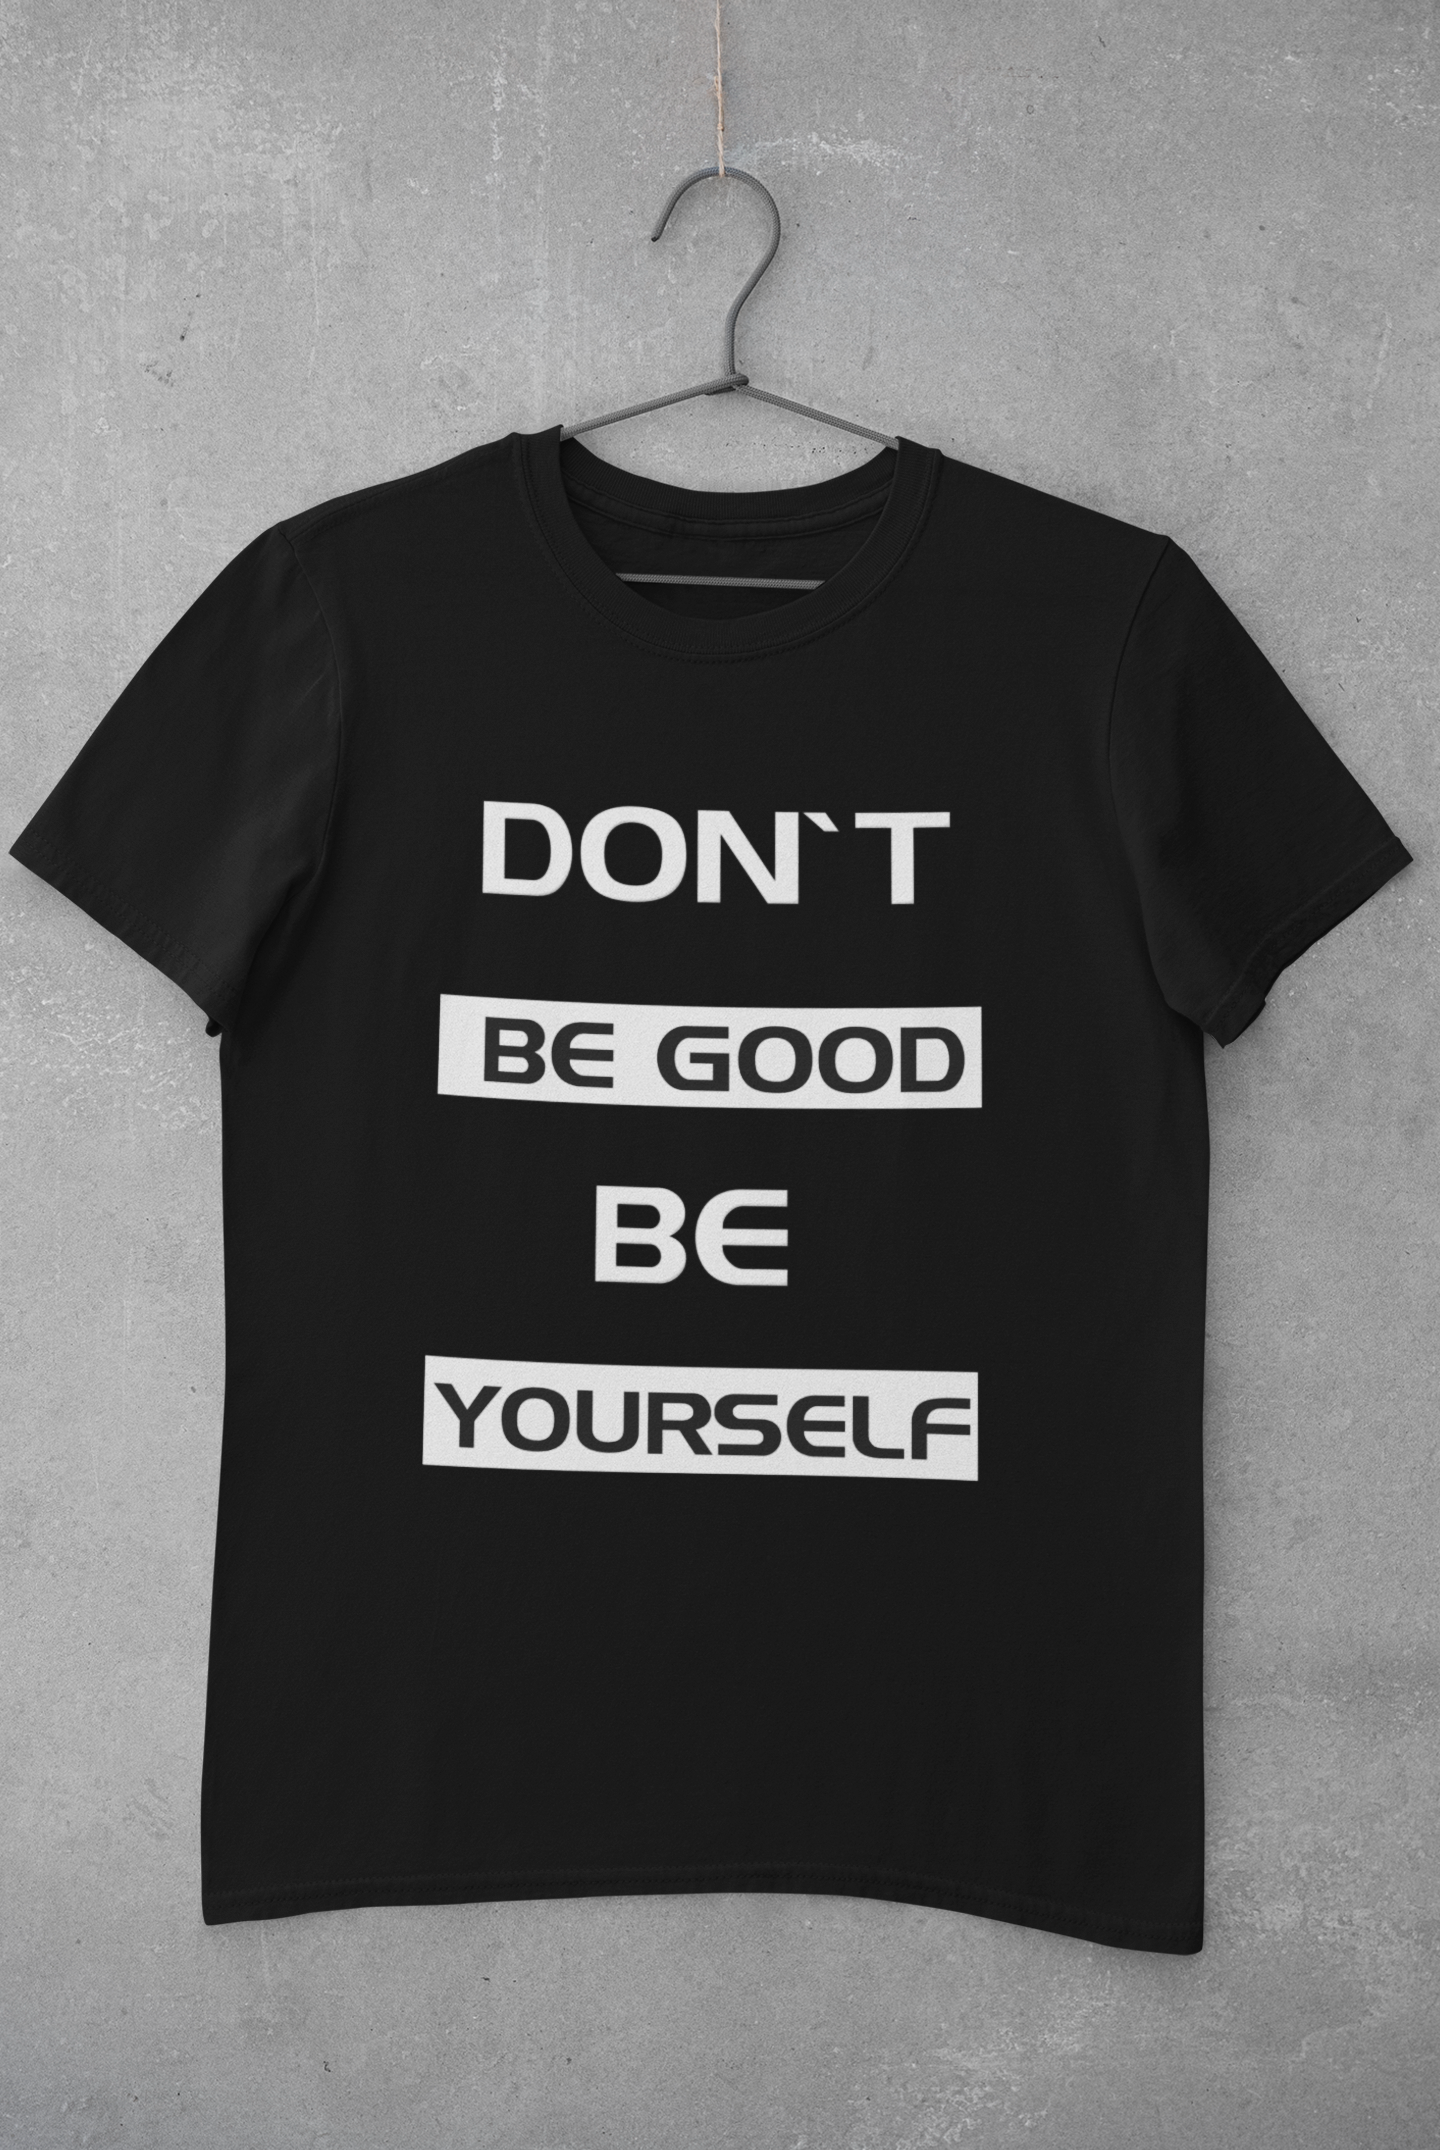 Women's T-Shirt (Don't Be Good Be Yourself)